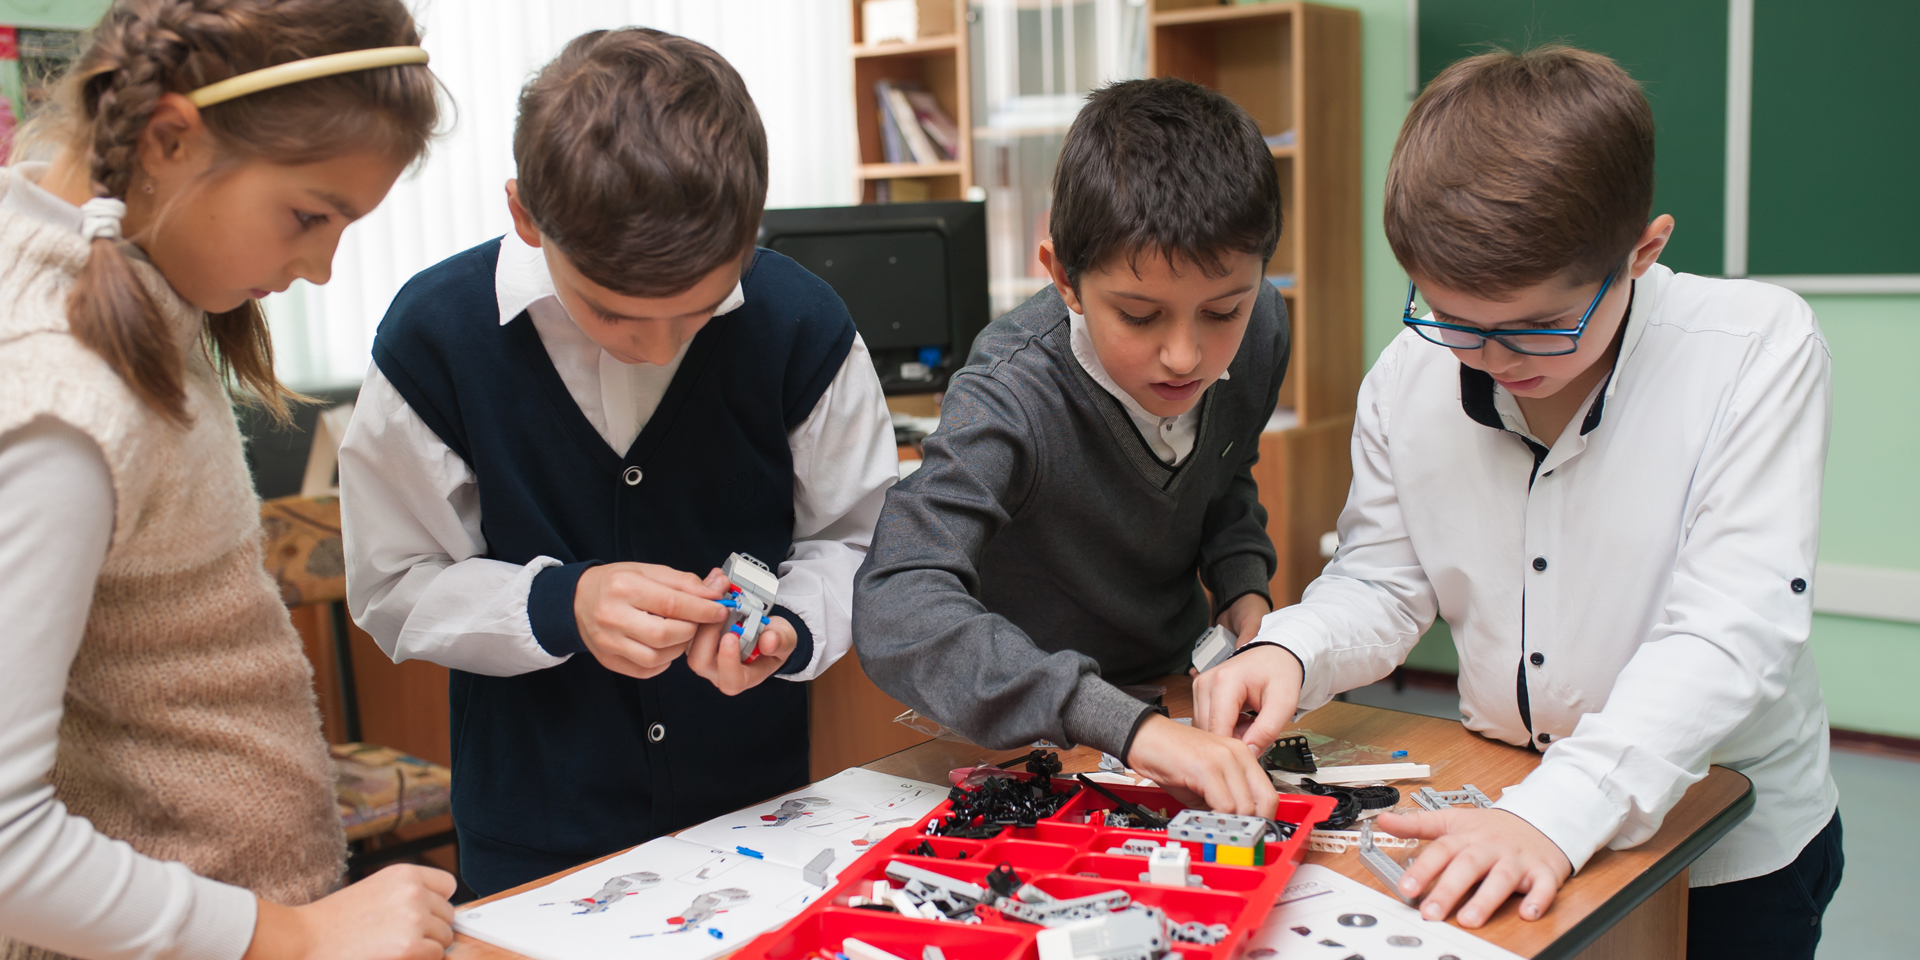 Four children putting together a small robot with parts from a red container sitting on a table.